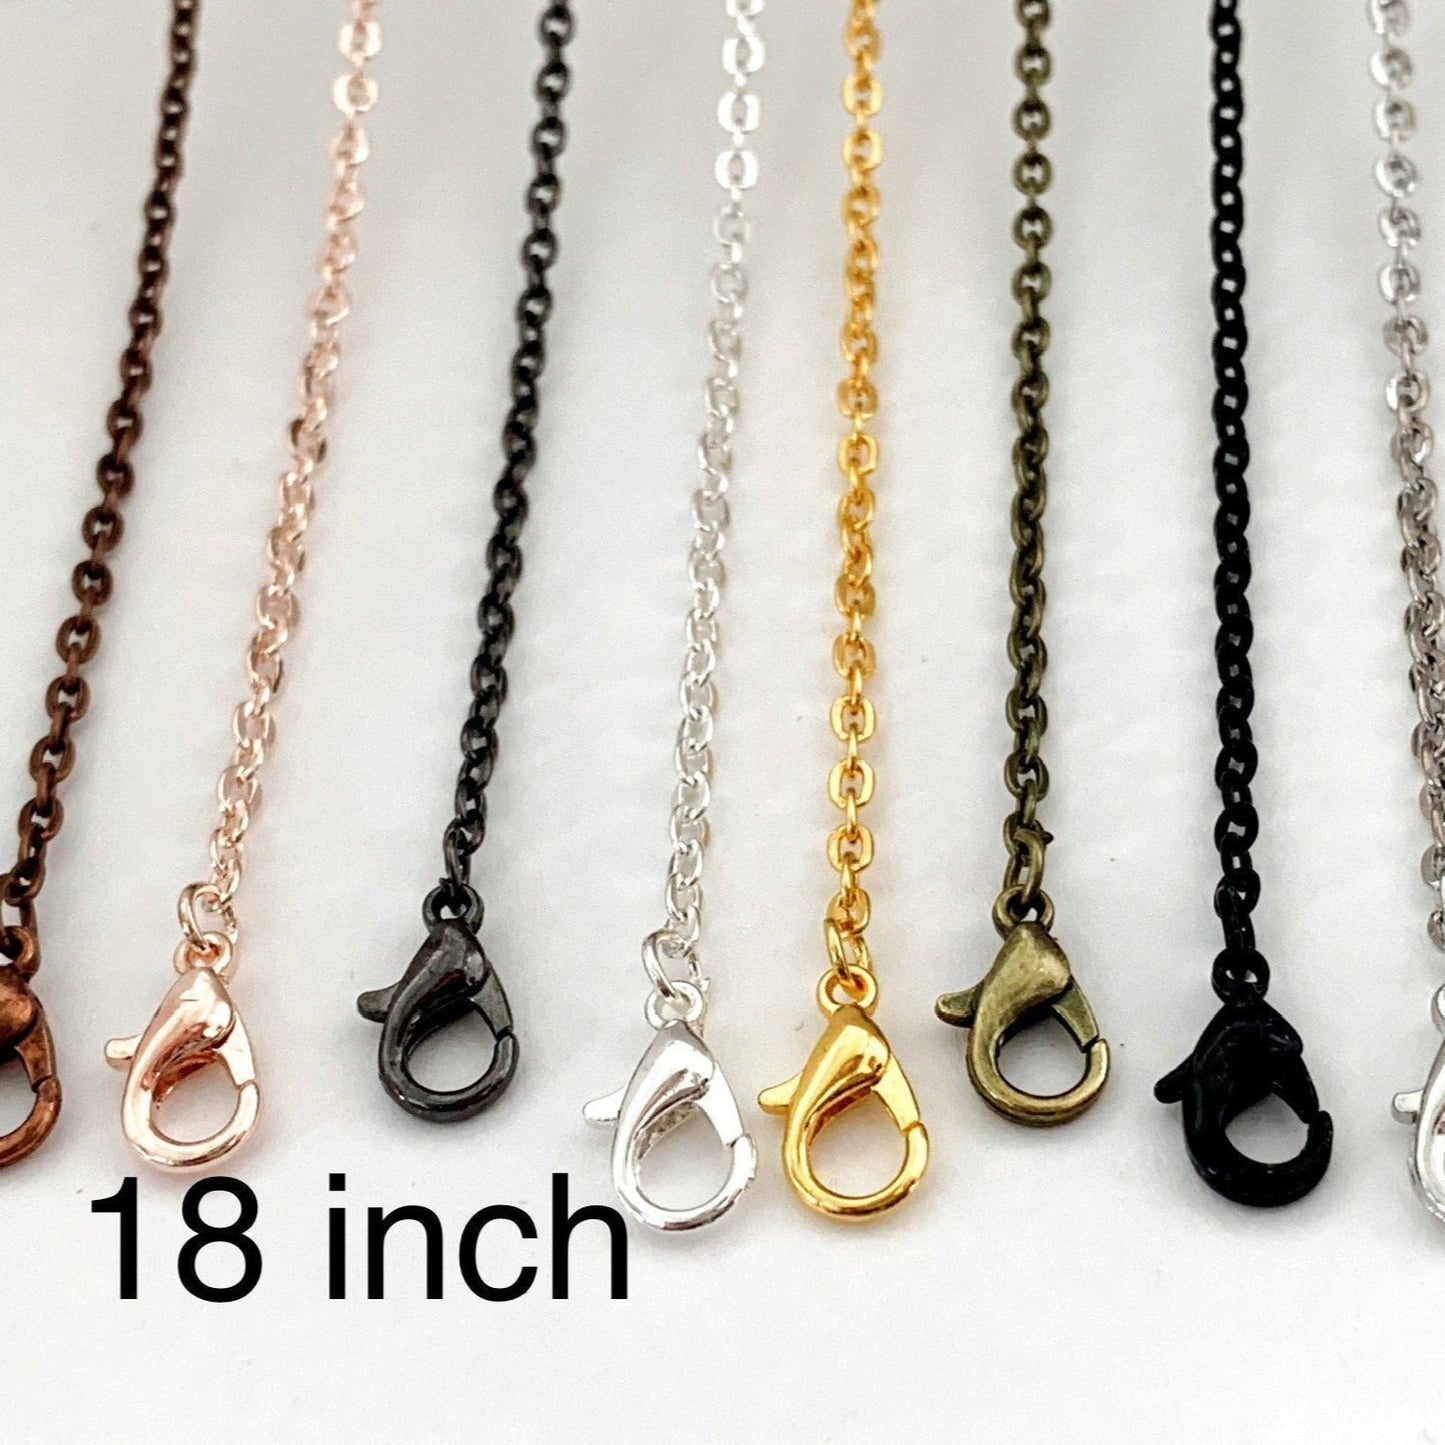  Chains for Pendants necklace for women